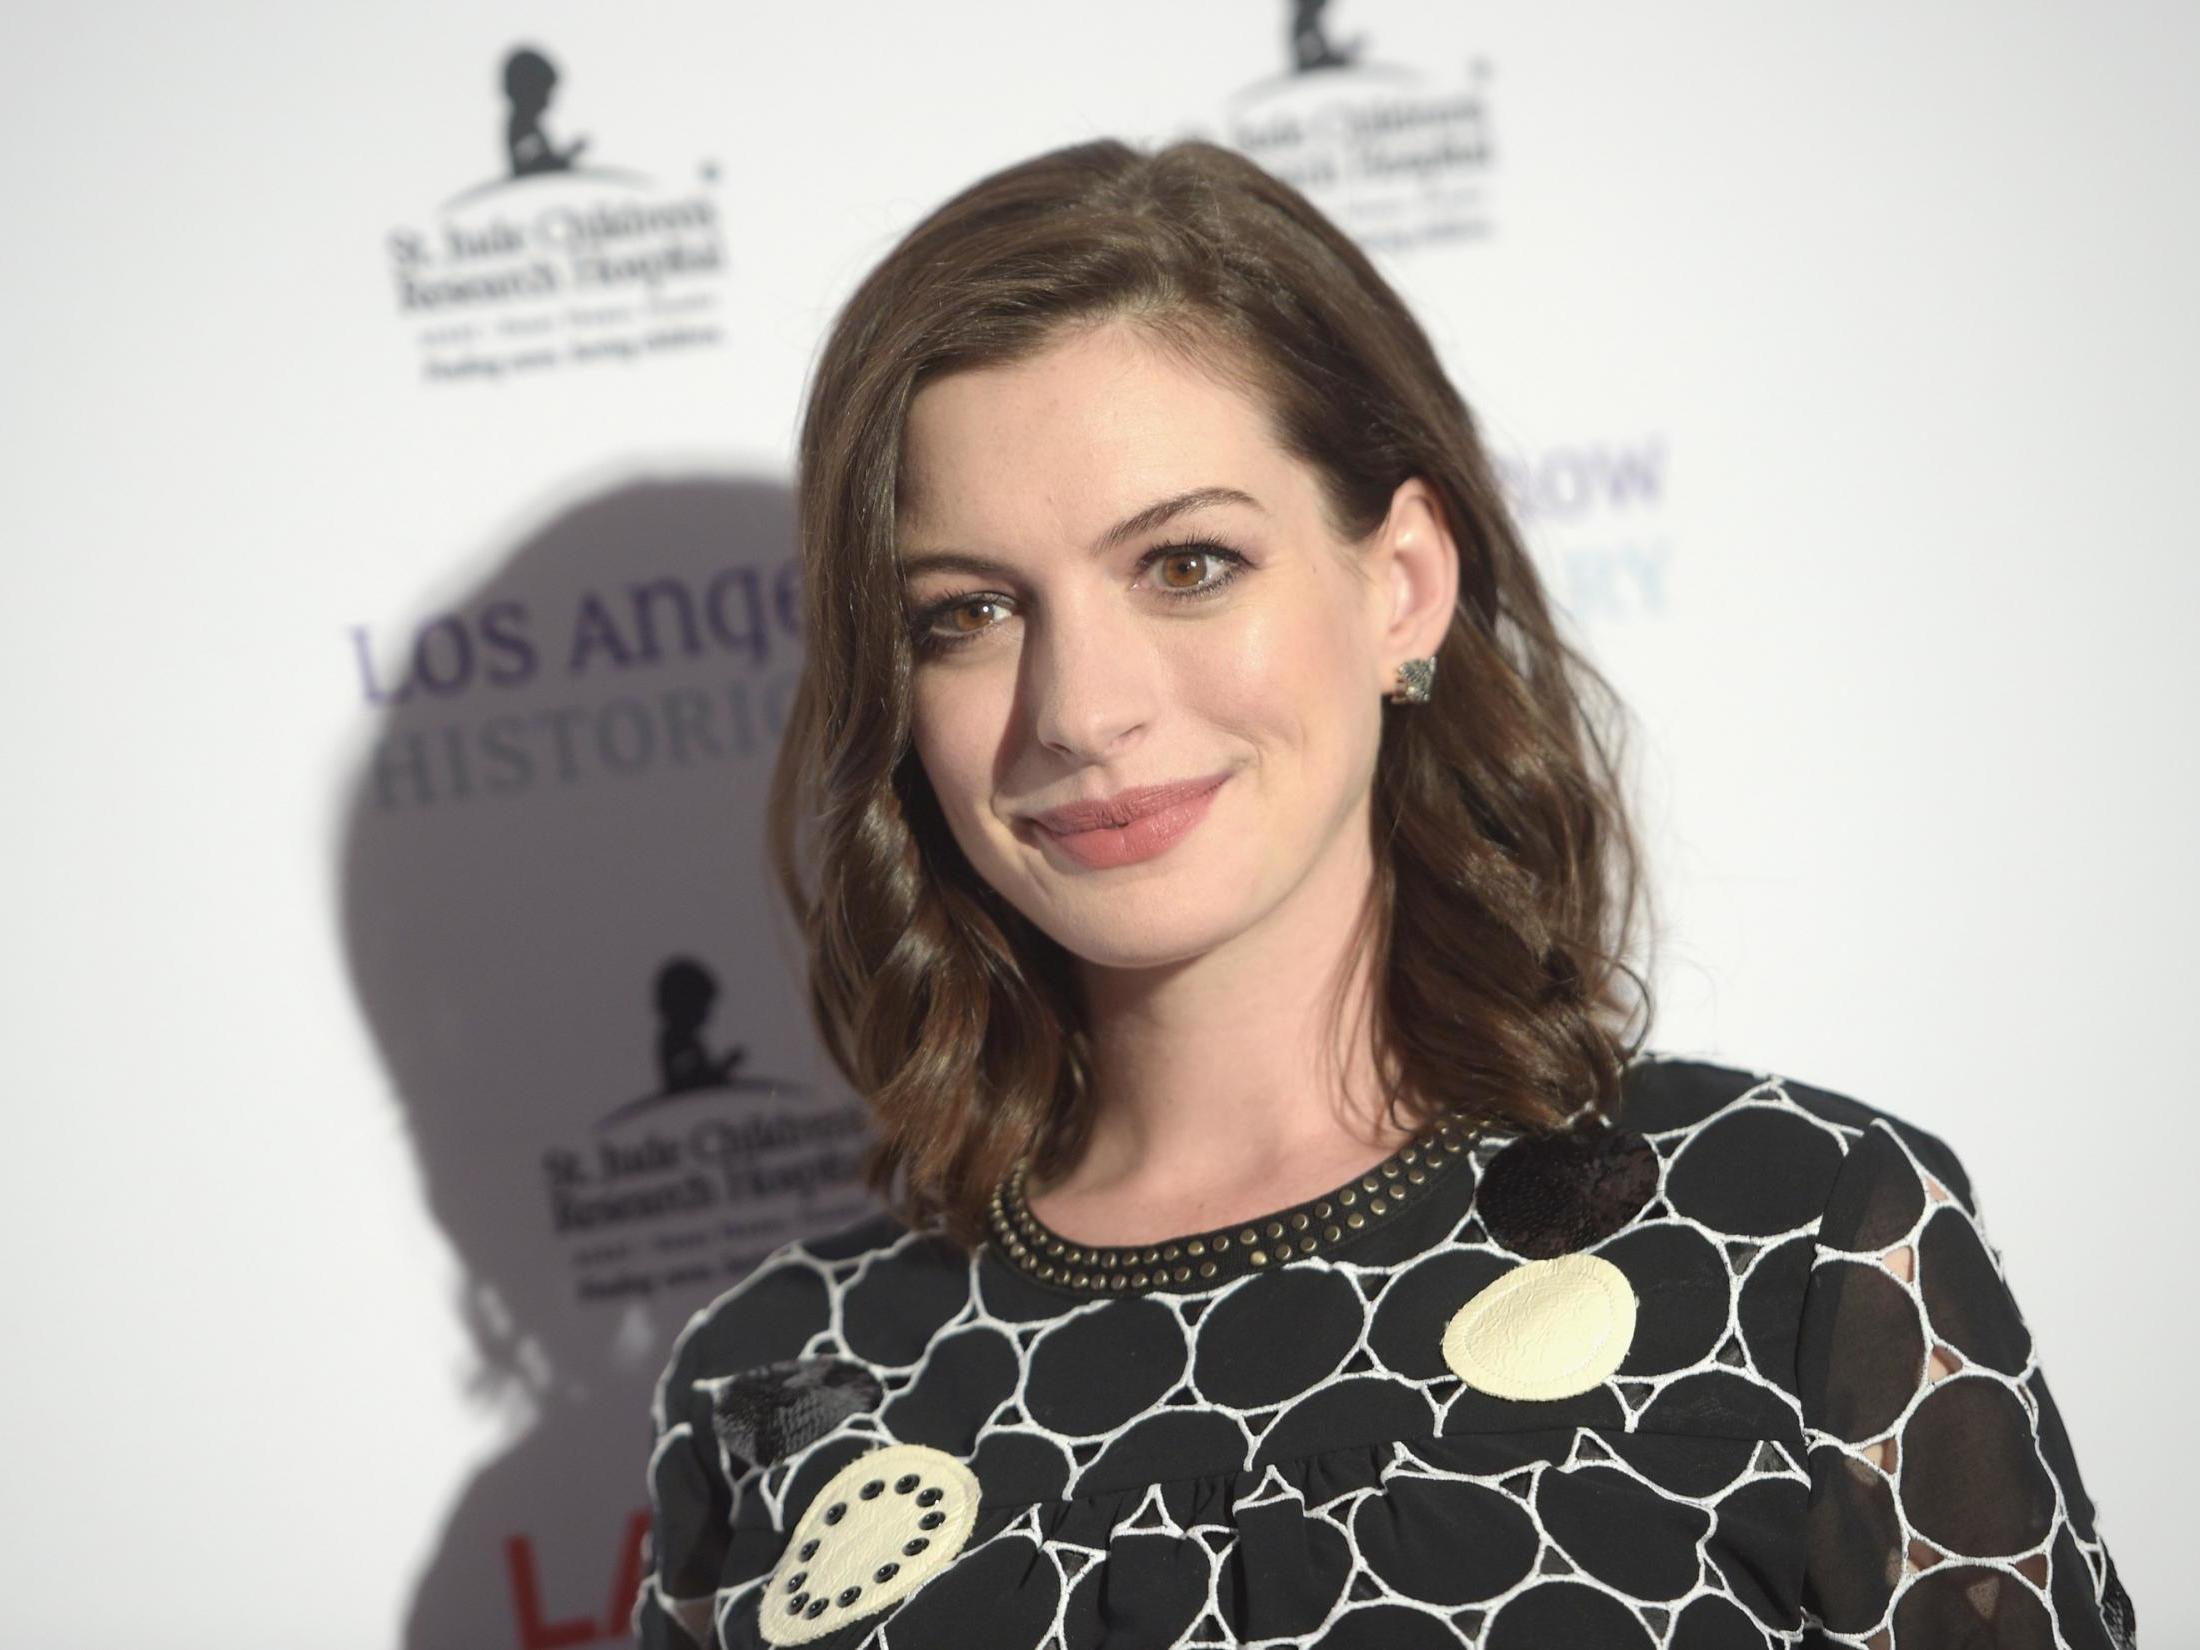 Anne Hathaway will star in the adaptation of the Roald Dahl book